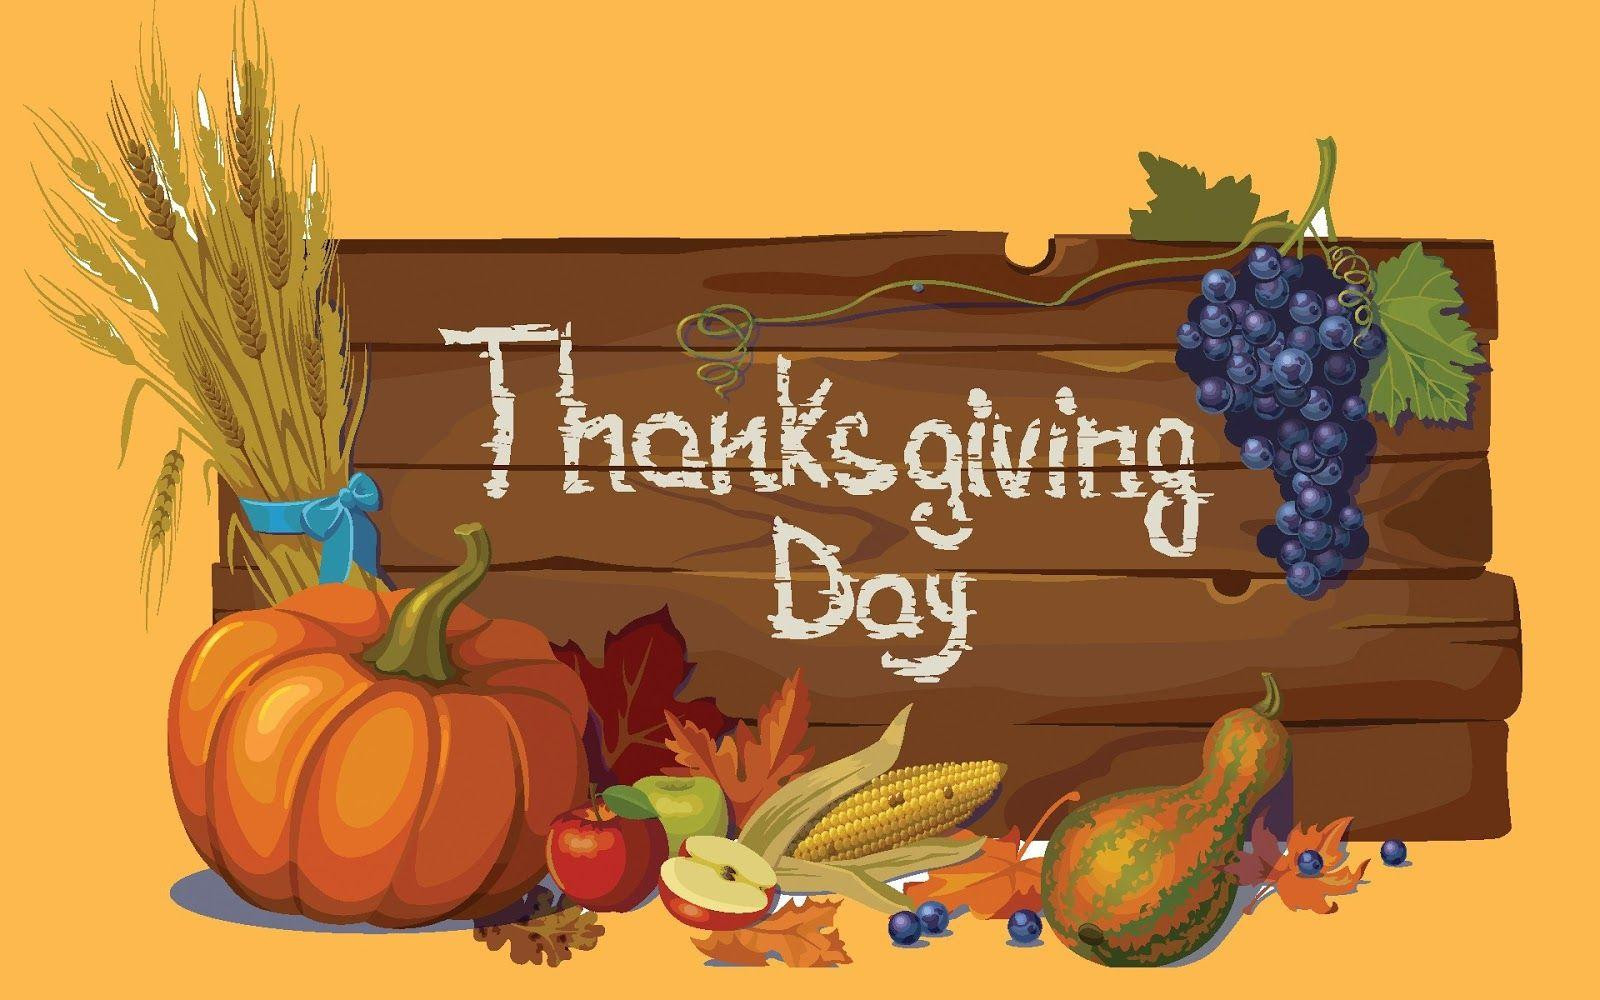 Thanksgiving Quotes Wallpaper
 Happy Thanksgiving 2018 Wallpapers Wallpaper Cave